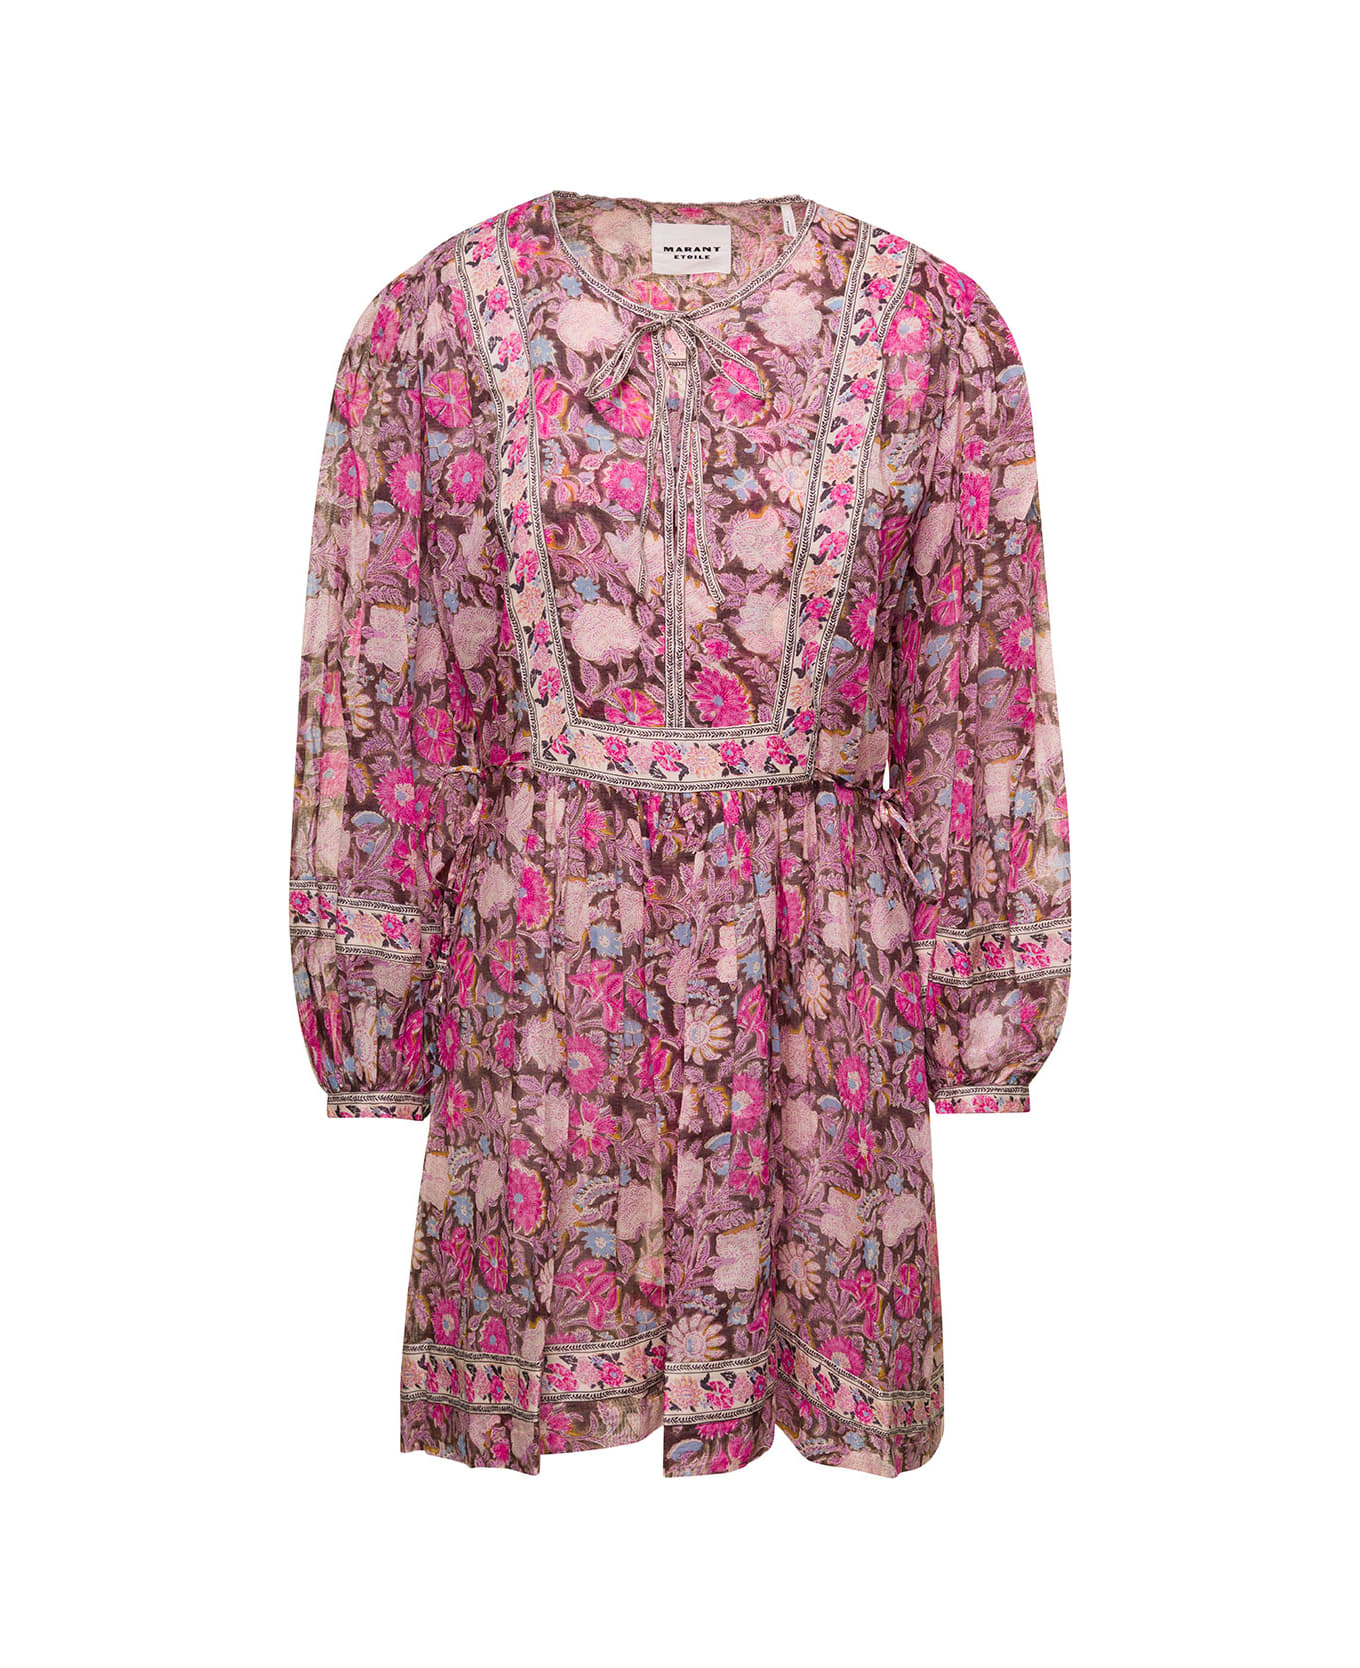 Marant Étoile Floral Print Pink Mini Dress With Long Sleeves In Cotton Woman - Multicolor